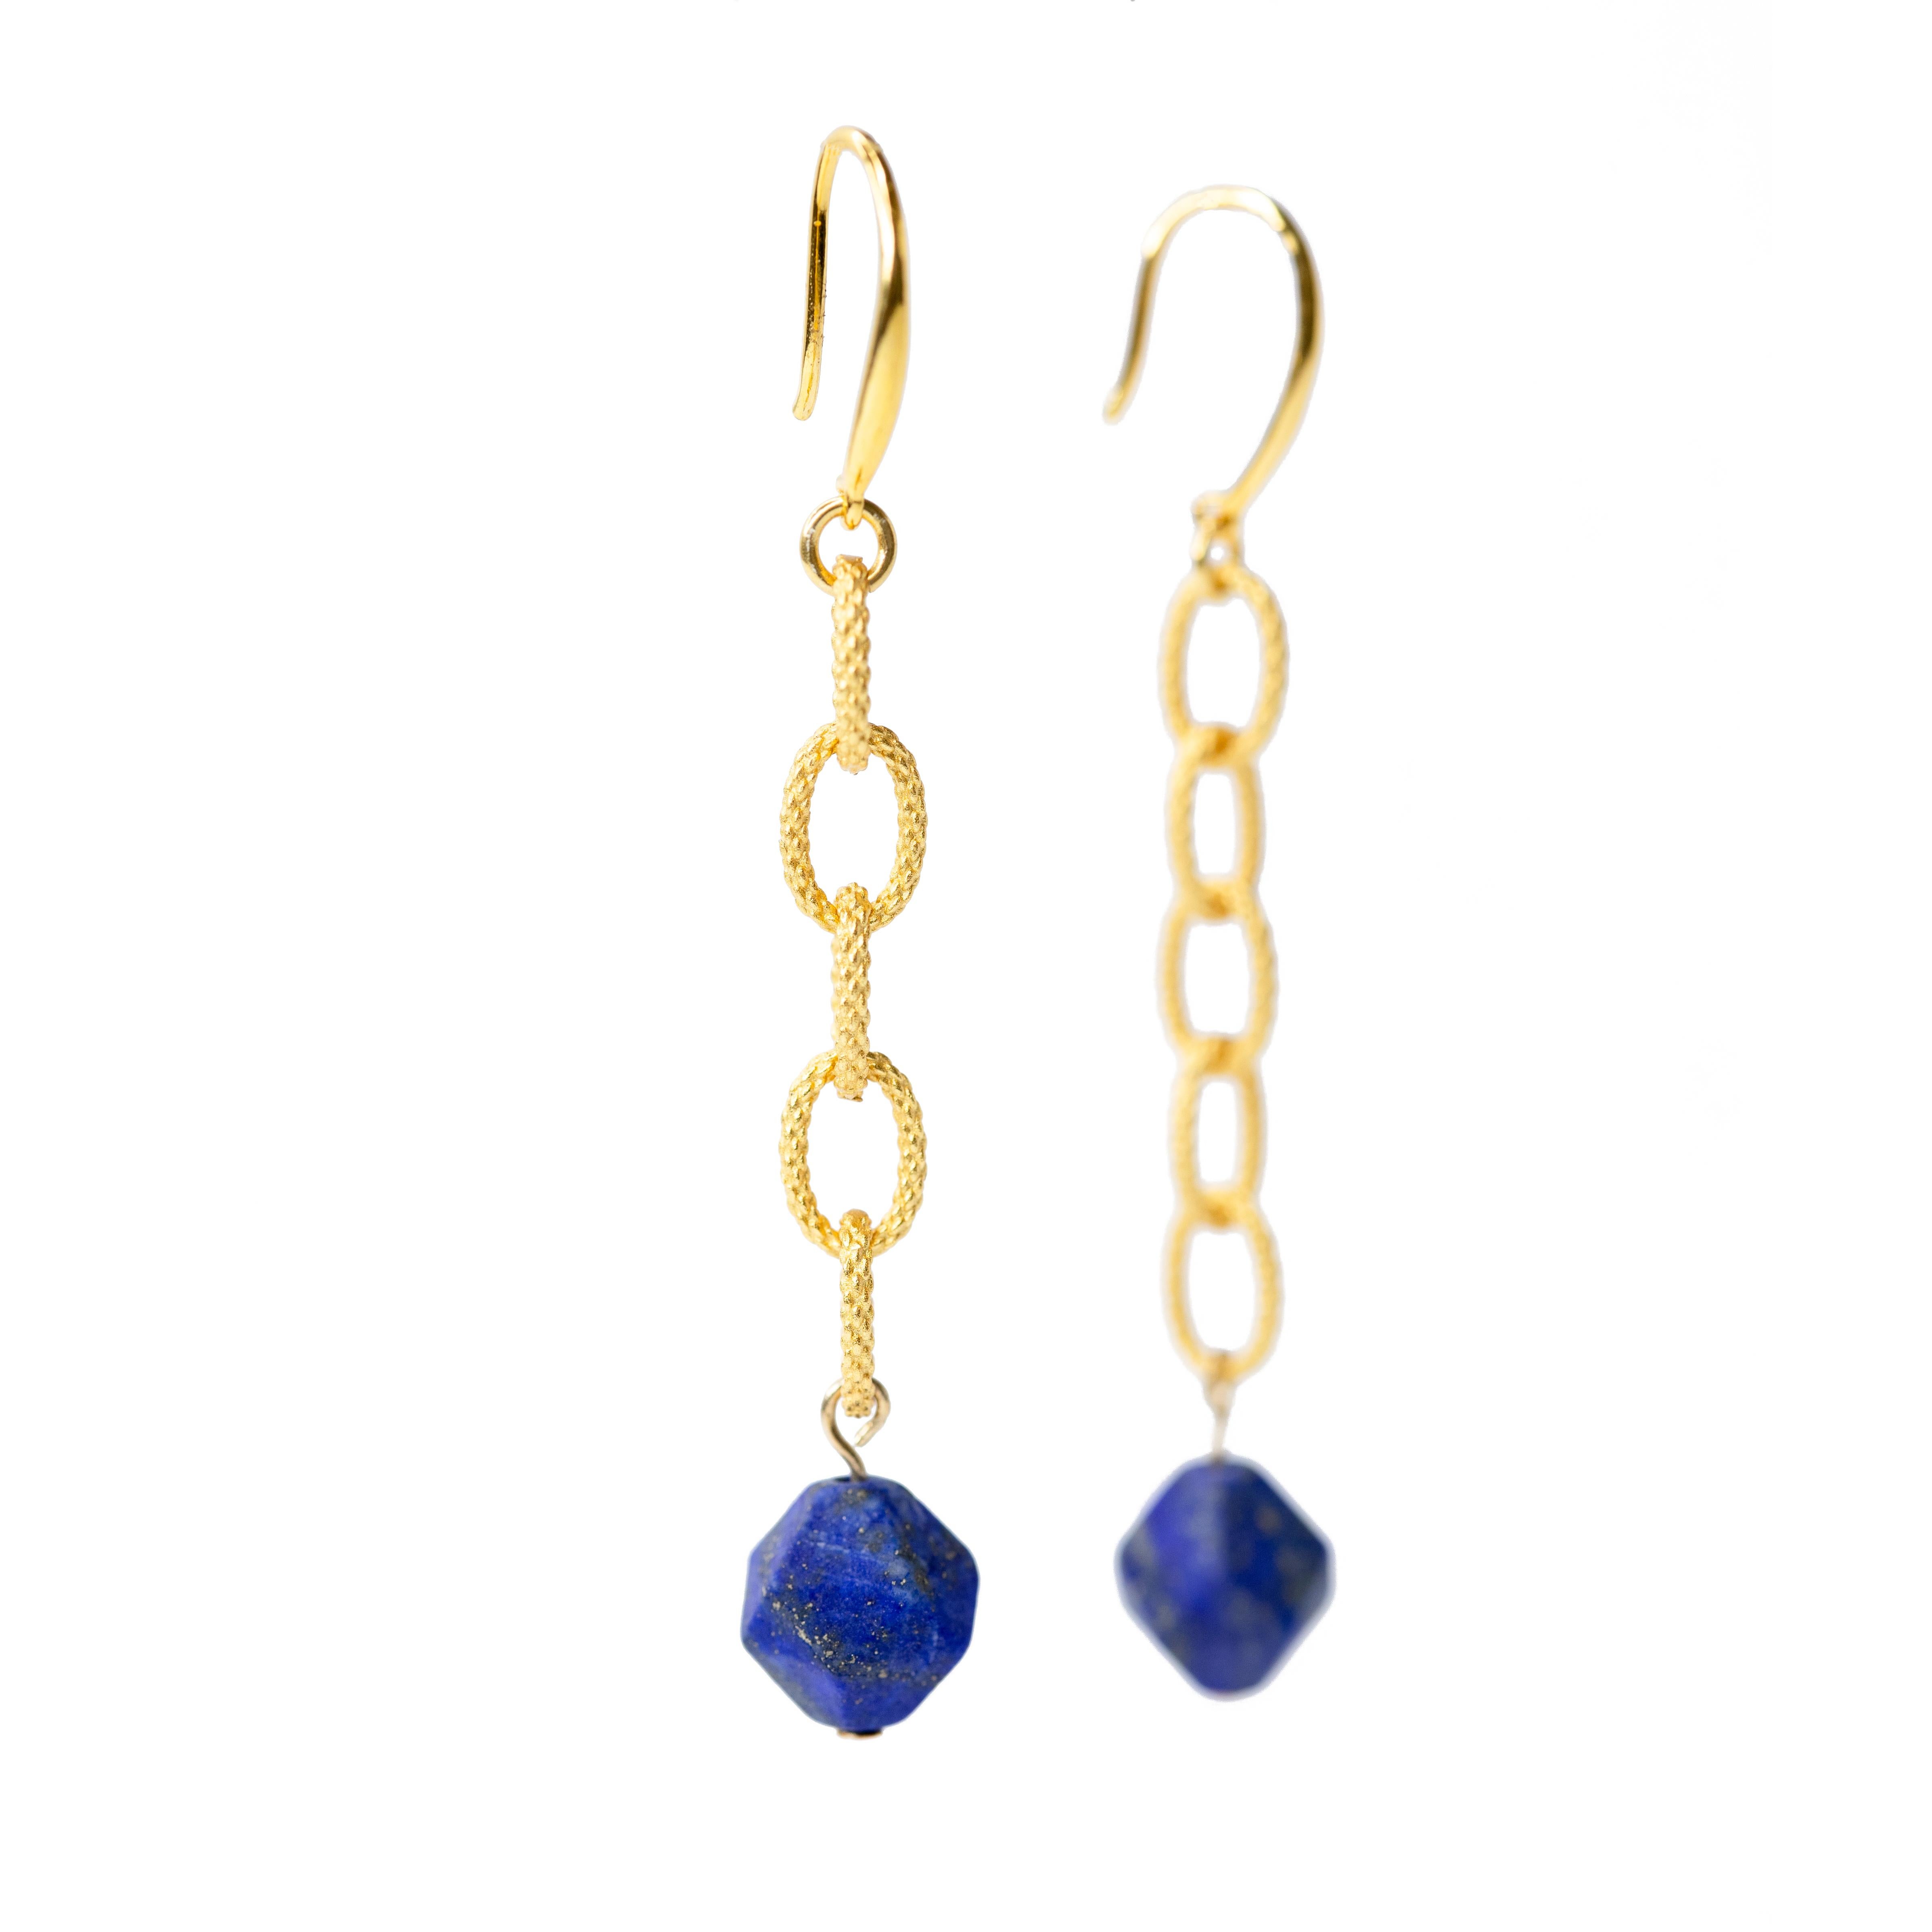 Lapis Lazuli Earring - Blue Madrid Earrings - by Bombyx House In New Condition For Sale In Westport, CT